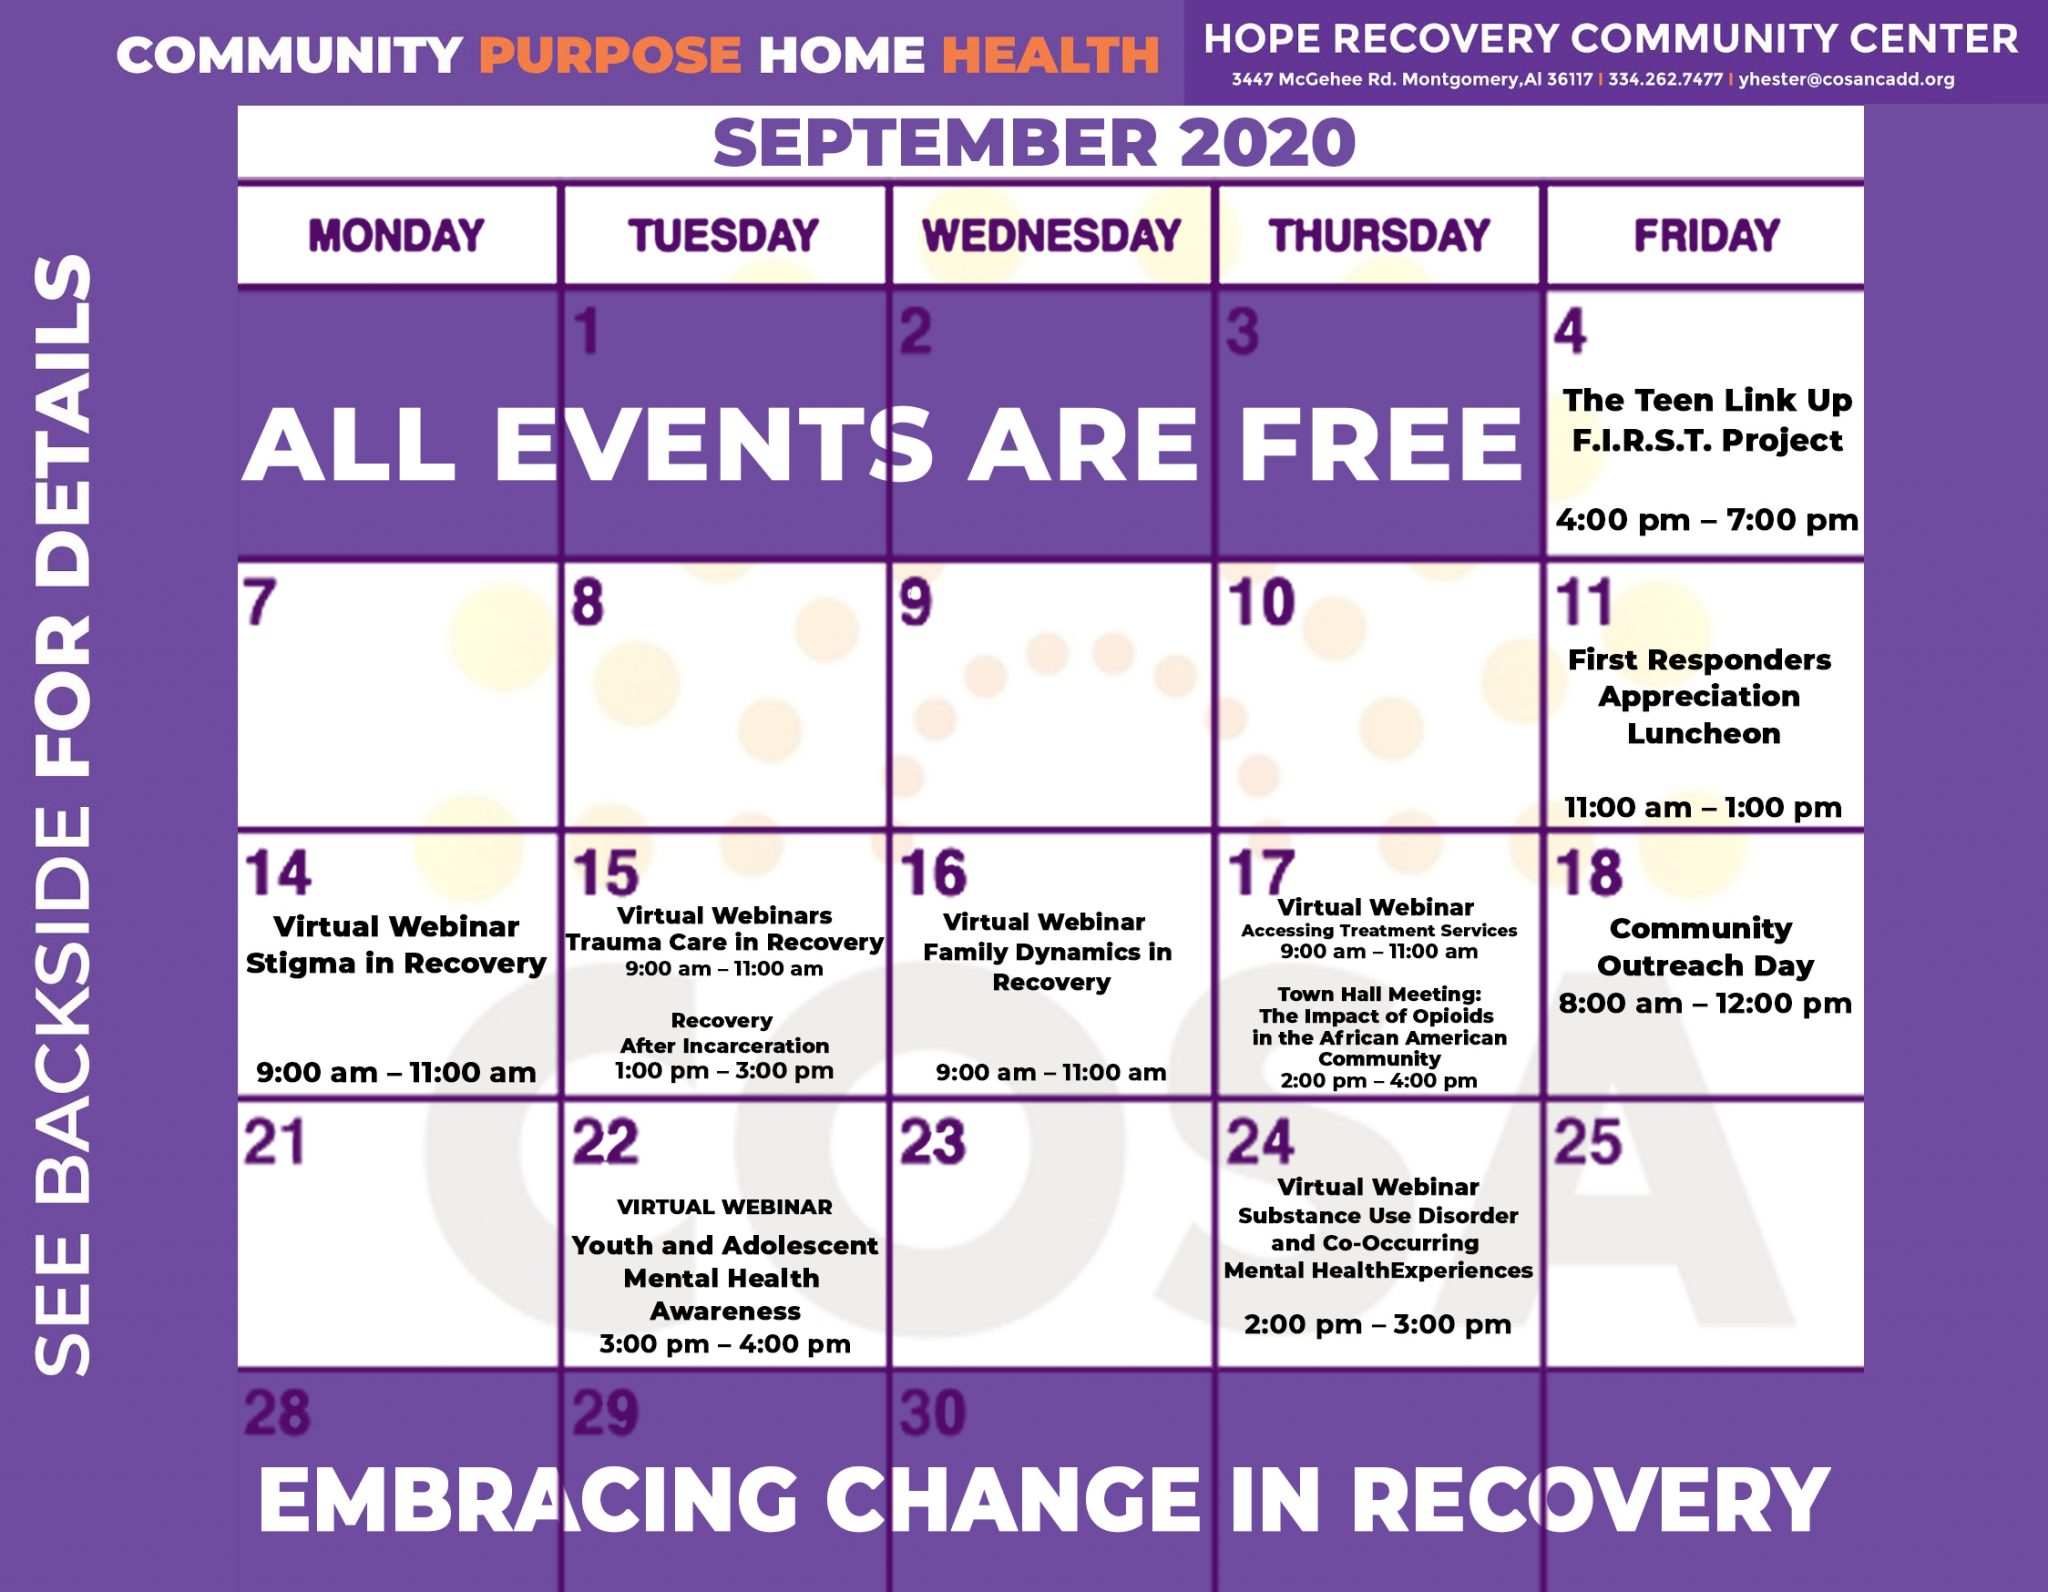 The Recovery Month Event Calendar Embracing Change in Recovery